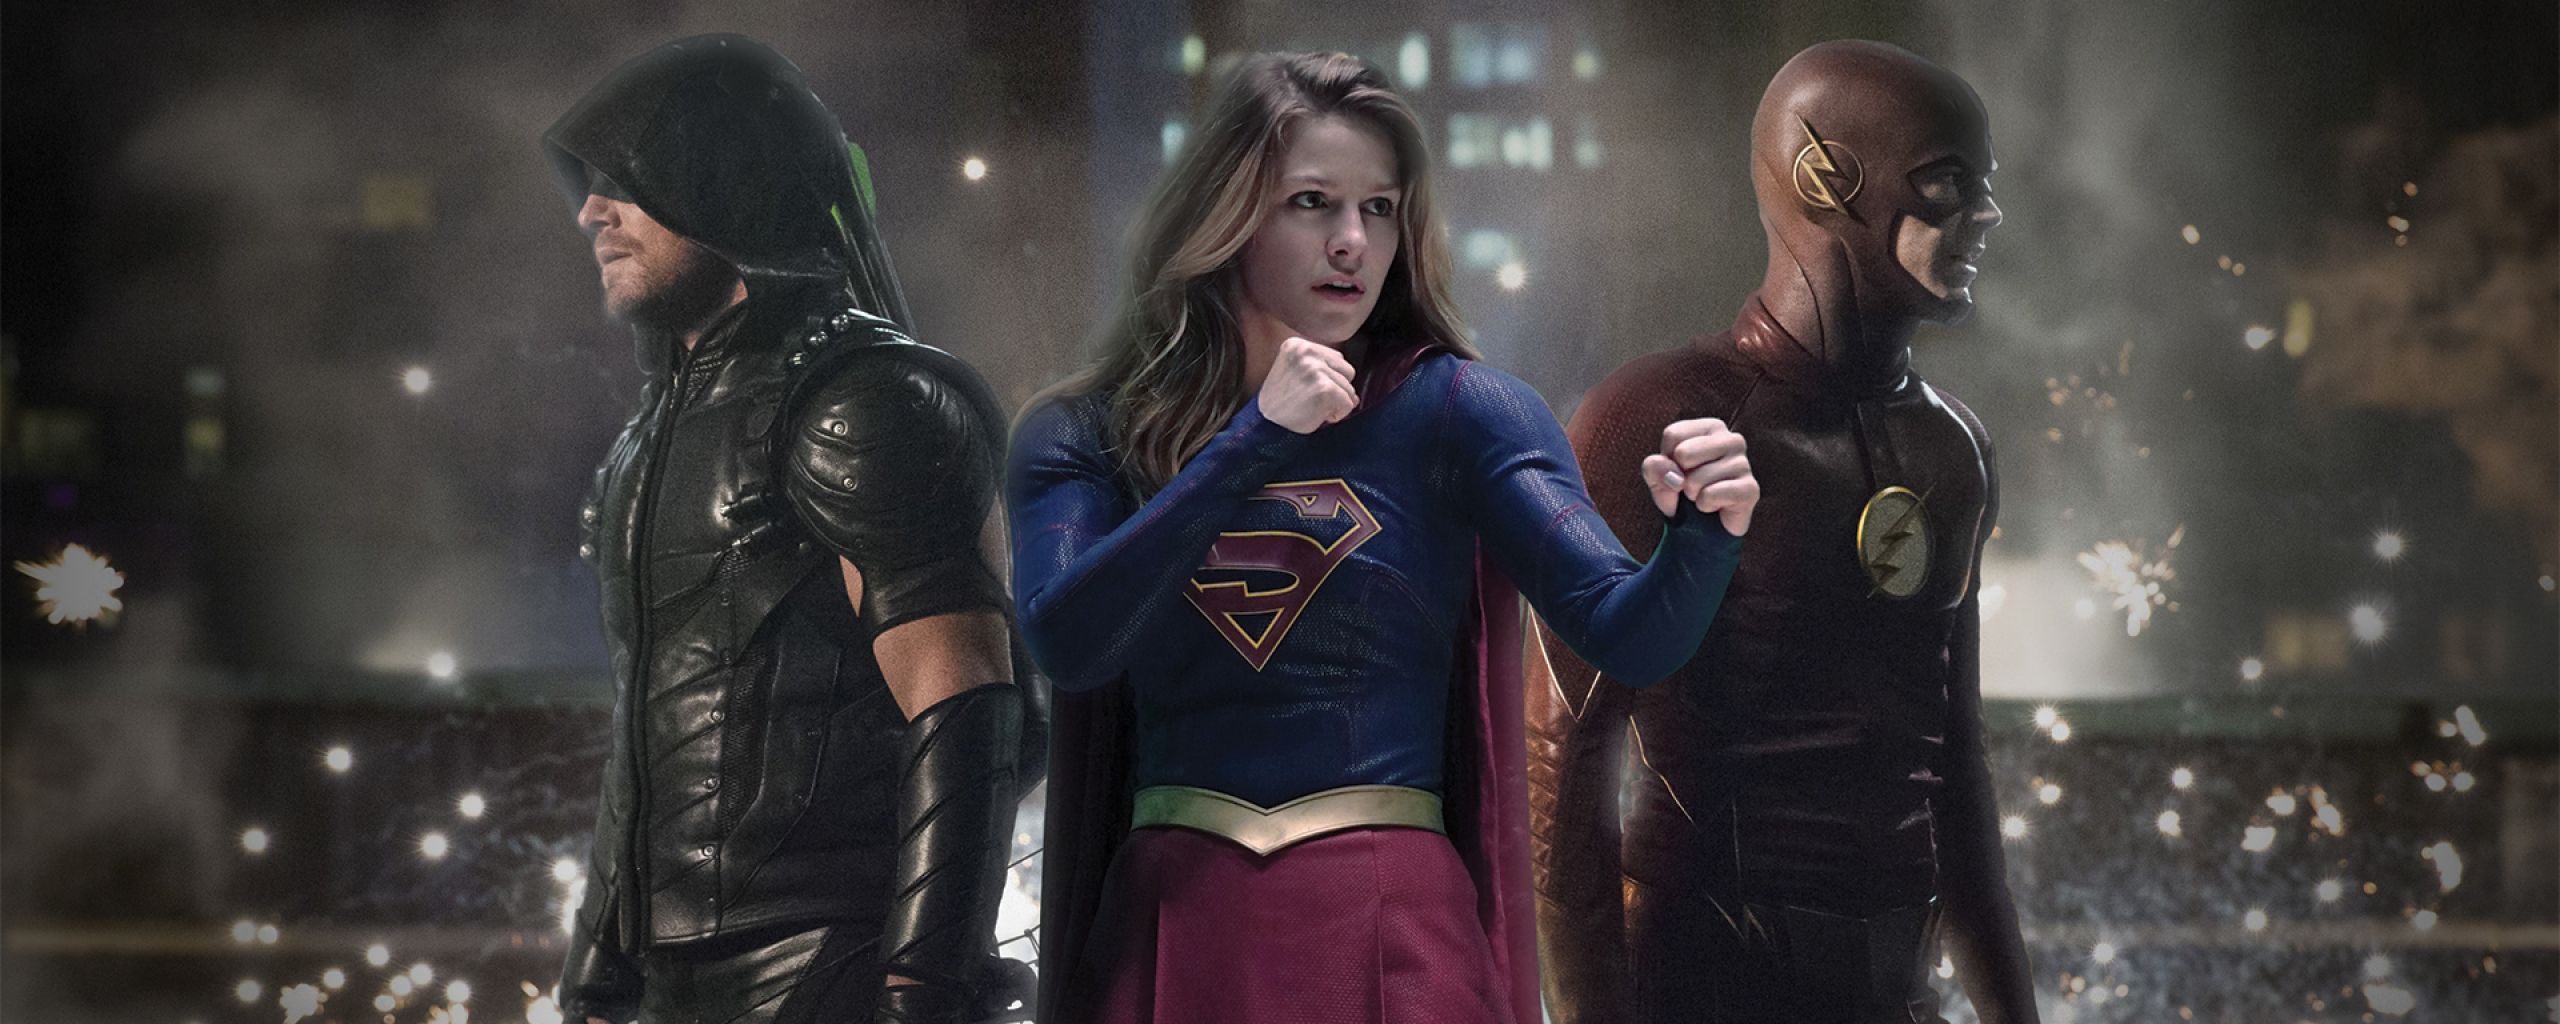 Legends Of Tomorrow Flash Arrow Supergirl 2560x1024 Resolution Wallpaper, HD TV Series 4K Wallpaper, Image, Photo and Background